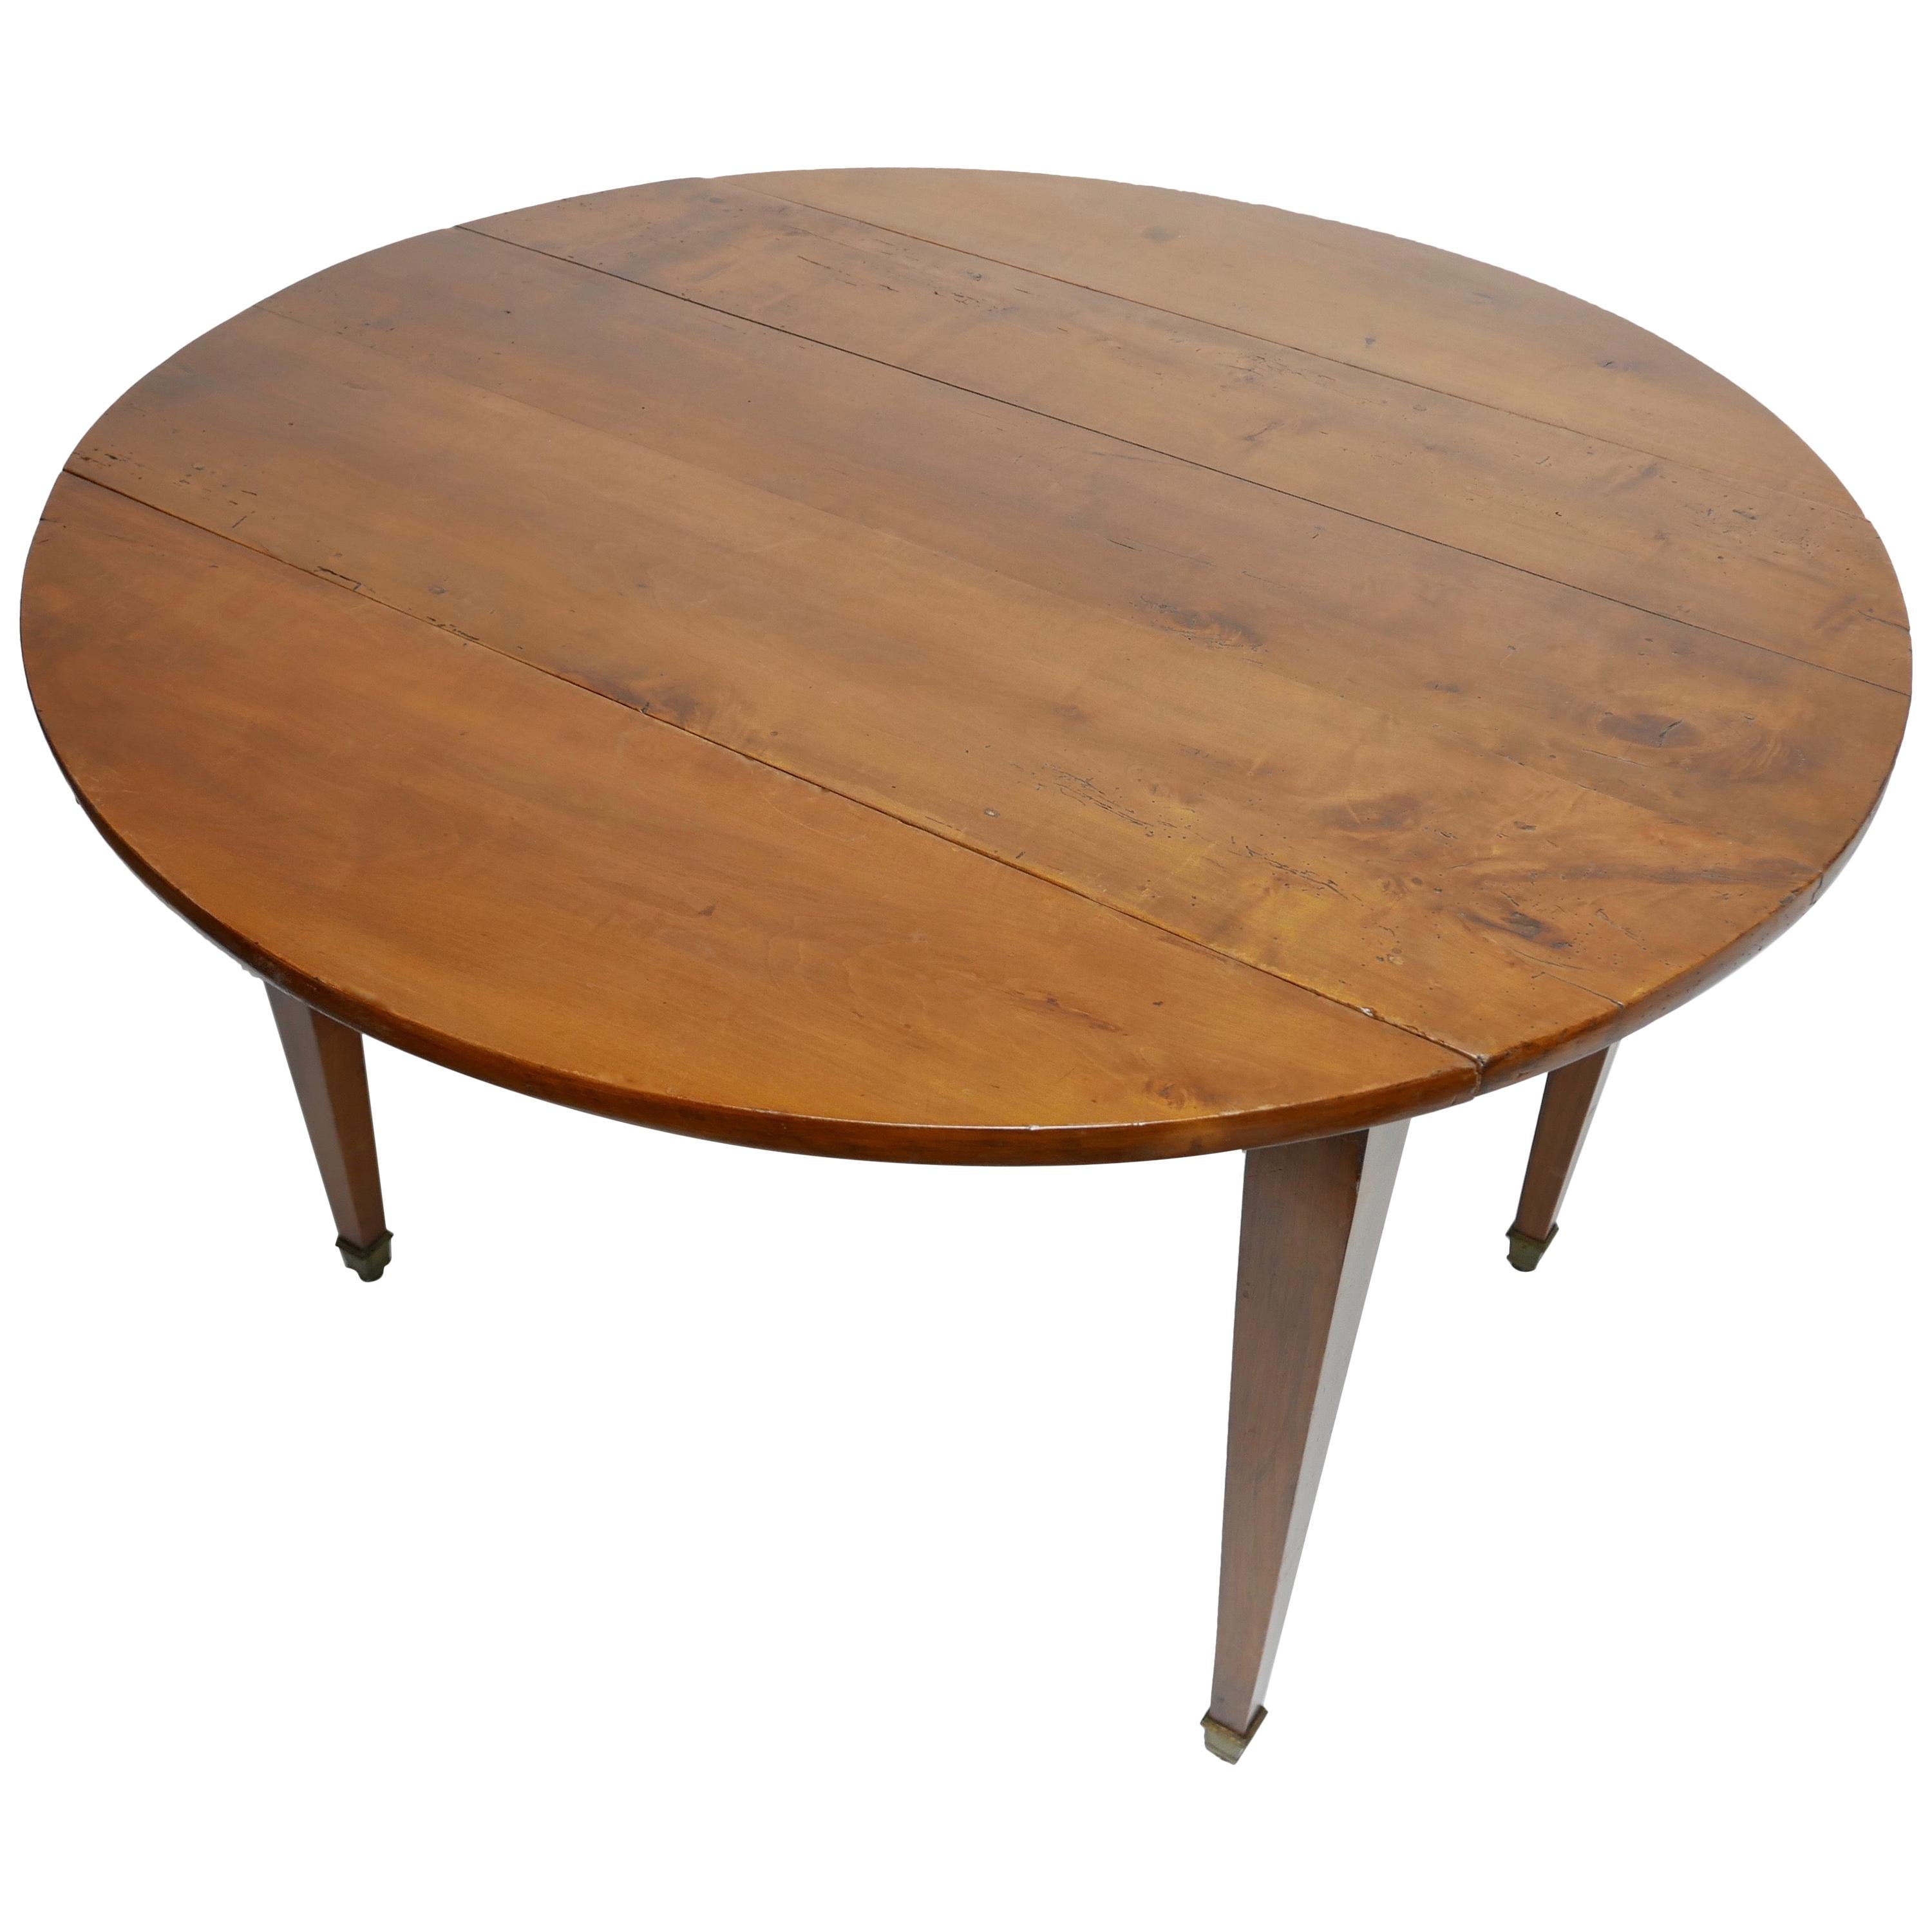 French Cherry Wood Drop-Leaf Table, Early 19th Century